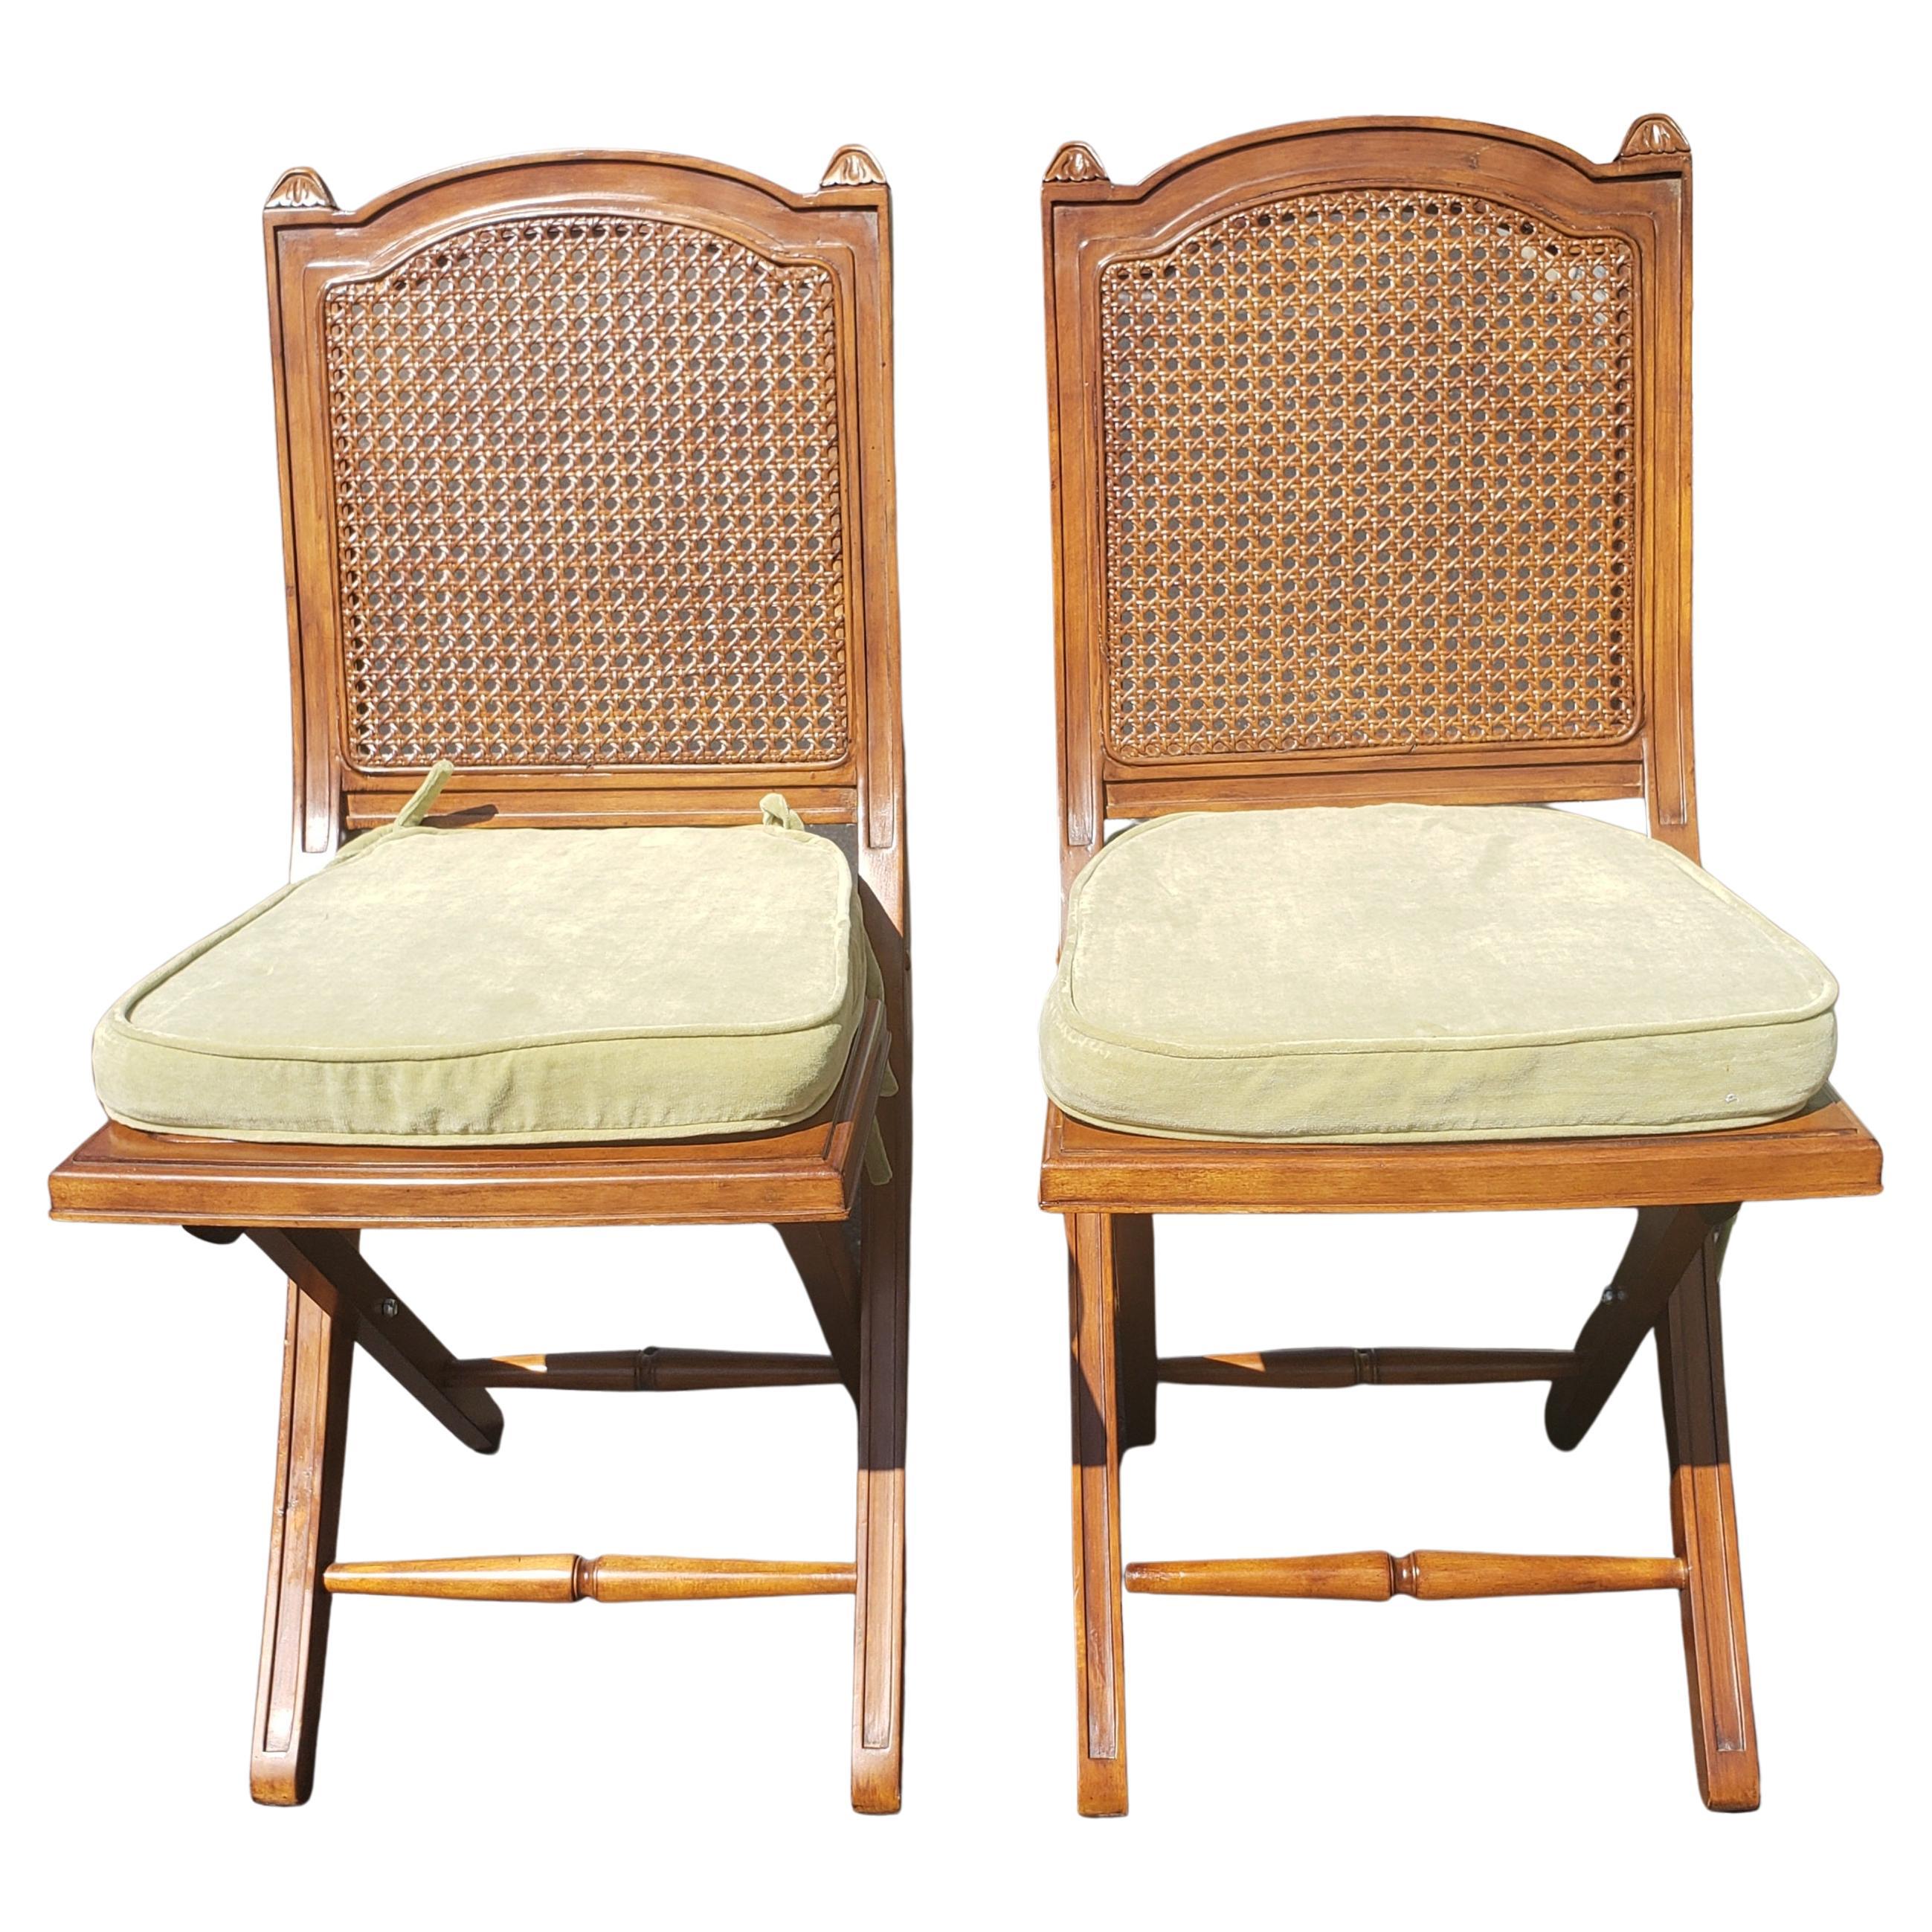 Exquisite pair of solid cherry and cane seat and back folding chairs with cushions.
Very well kept and in excellent vintage condition. Come with soft green velvet cushion in like-new condition.
Measures 14.5